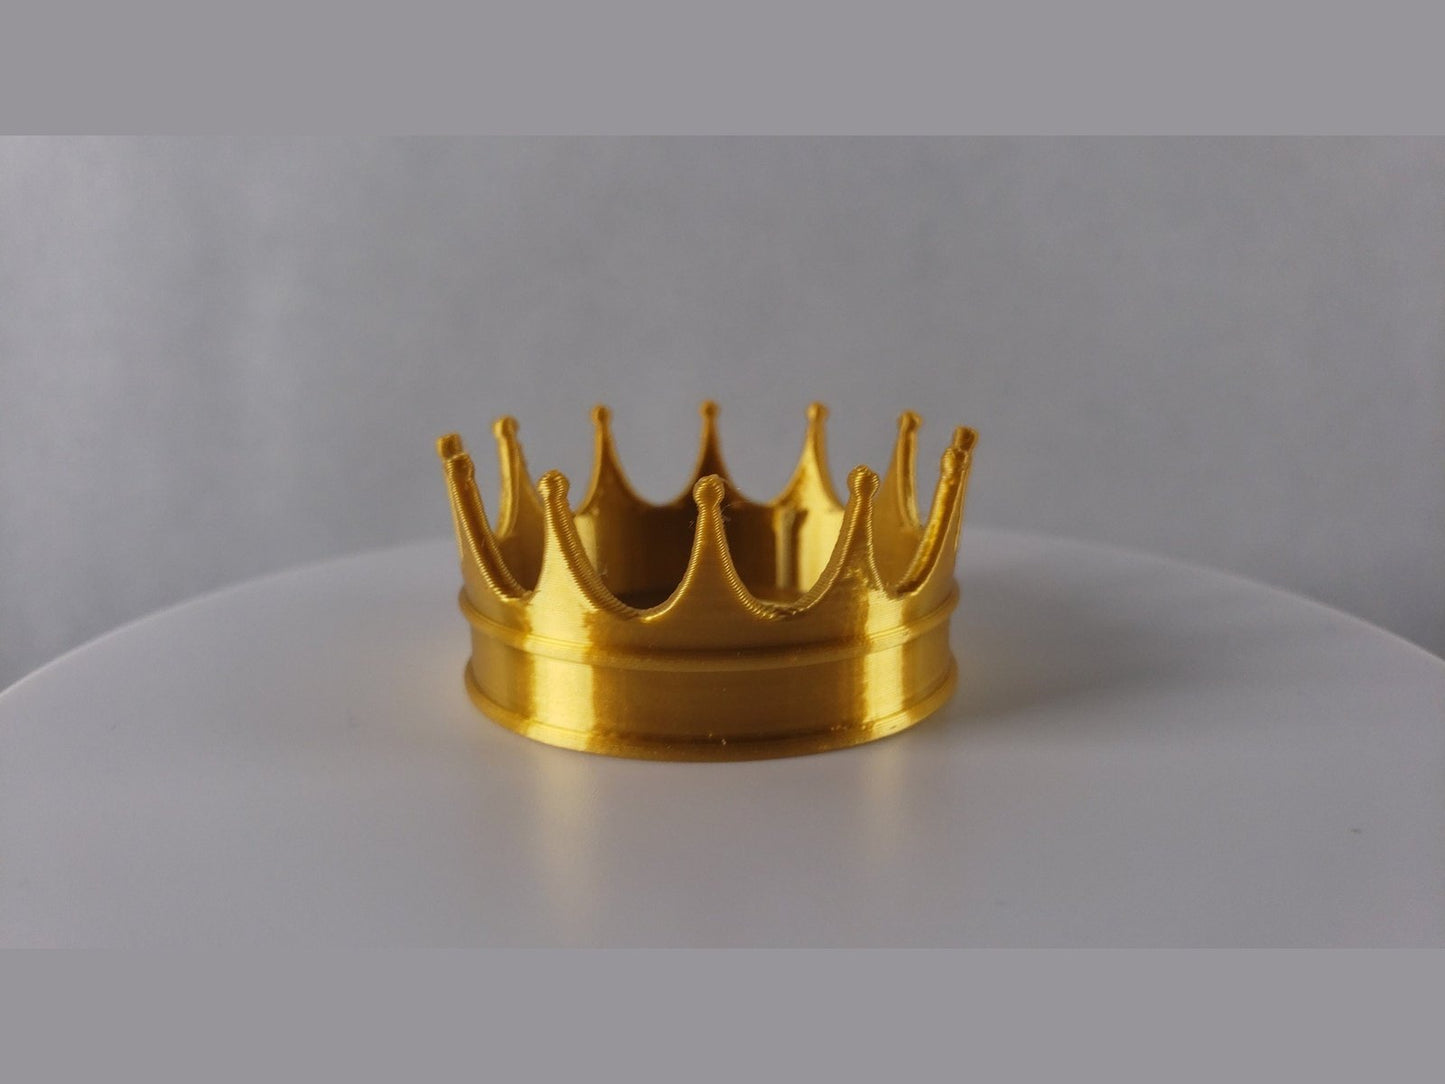 Crown Attachment for Headset, Gaming and Streaming Headset Accessories, cosplay, Streaming Prop, gaming streamer gift